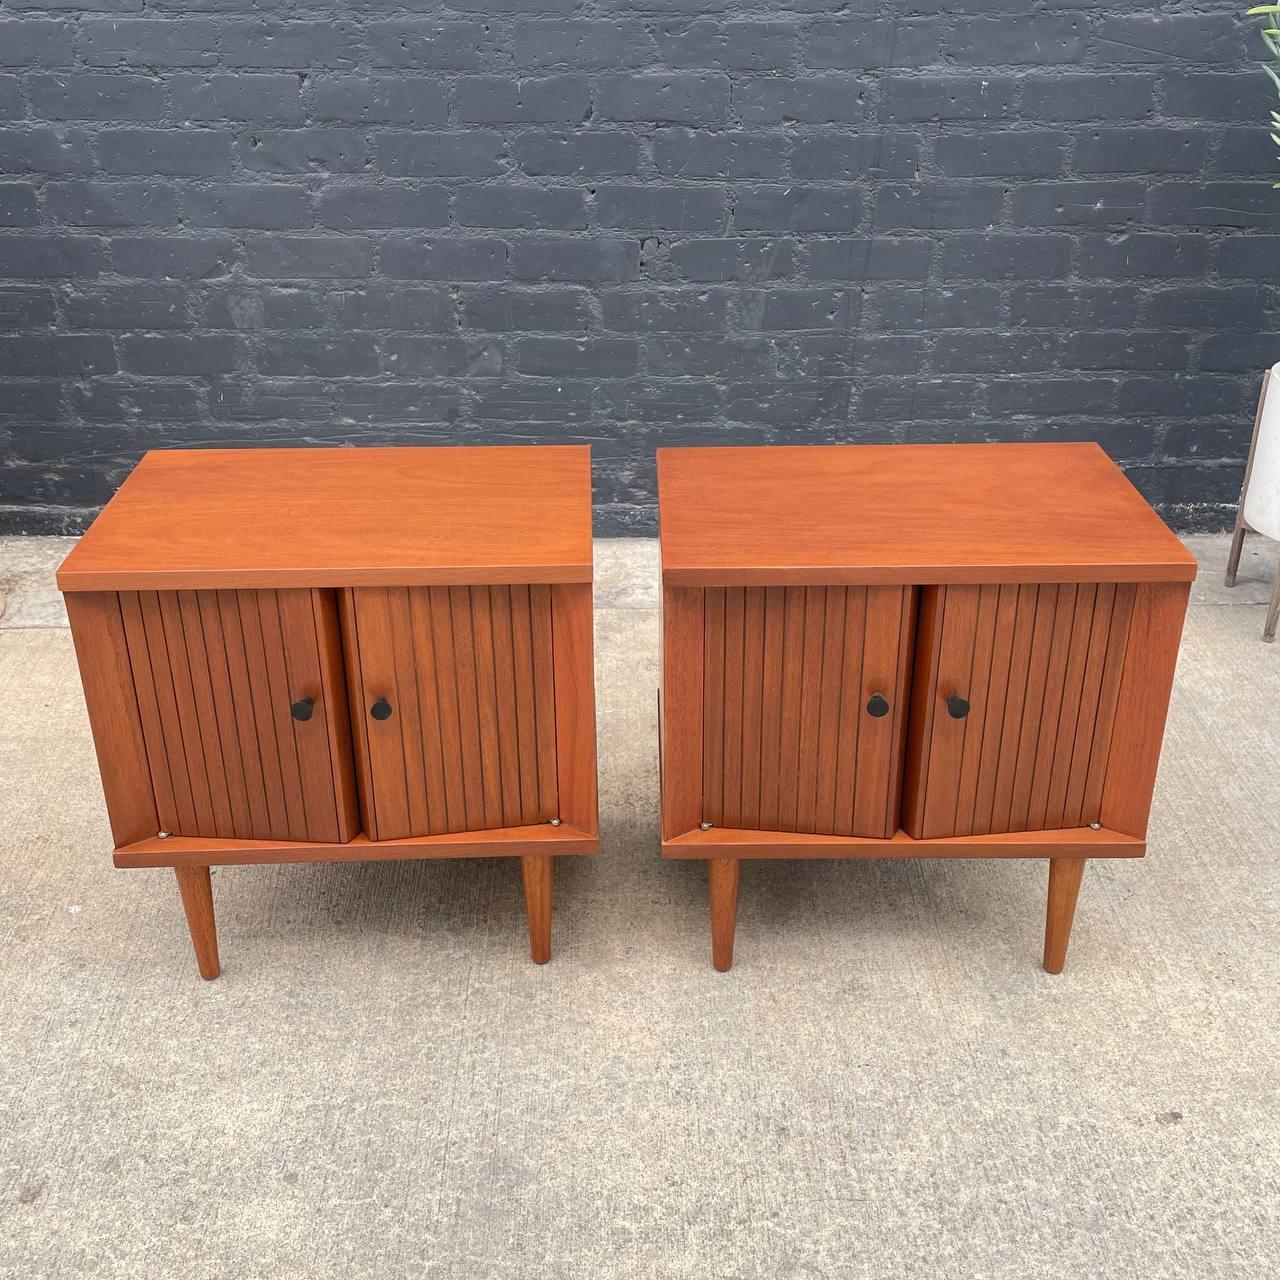 American Newly Refinished - Pair of Mid-Century Modern Walnut Night Stands by Basic-Witz